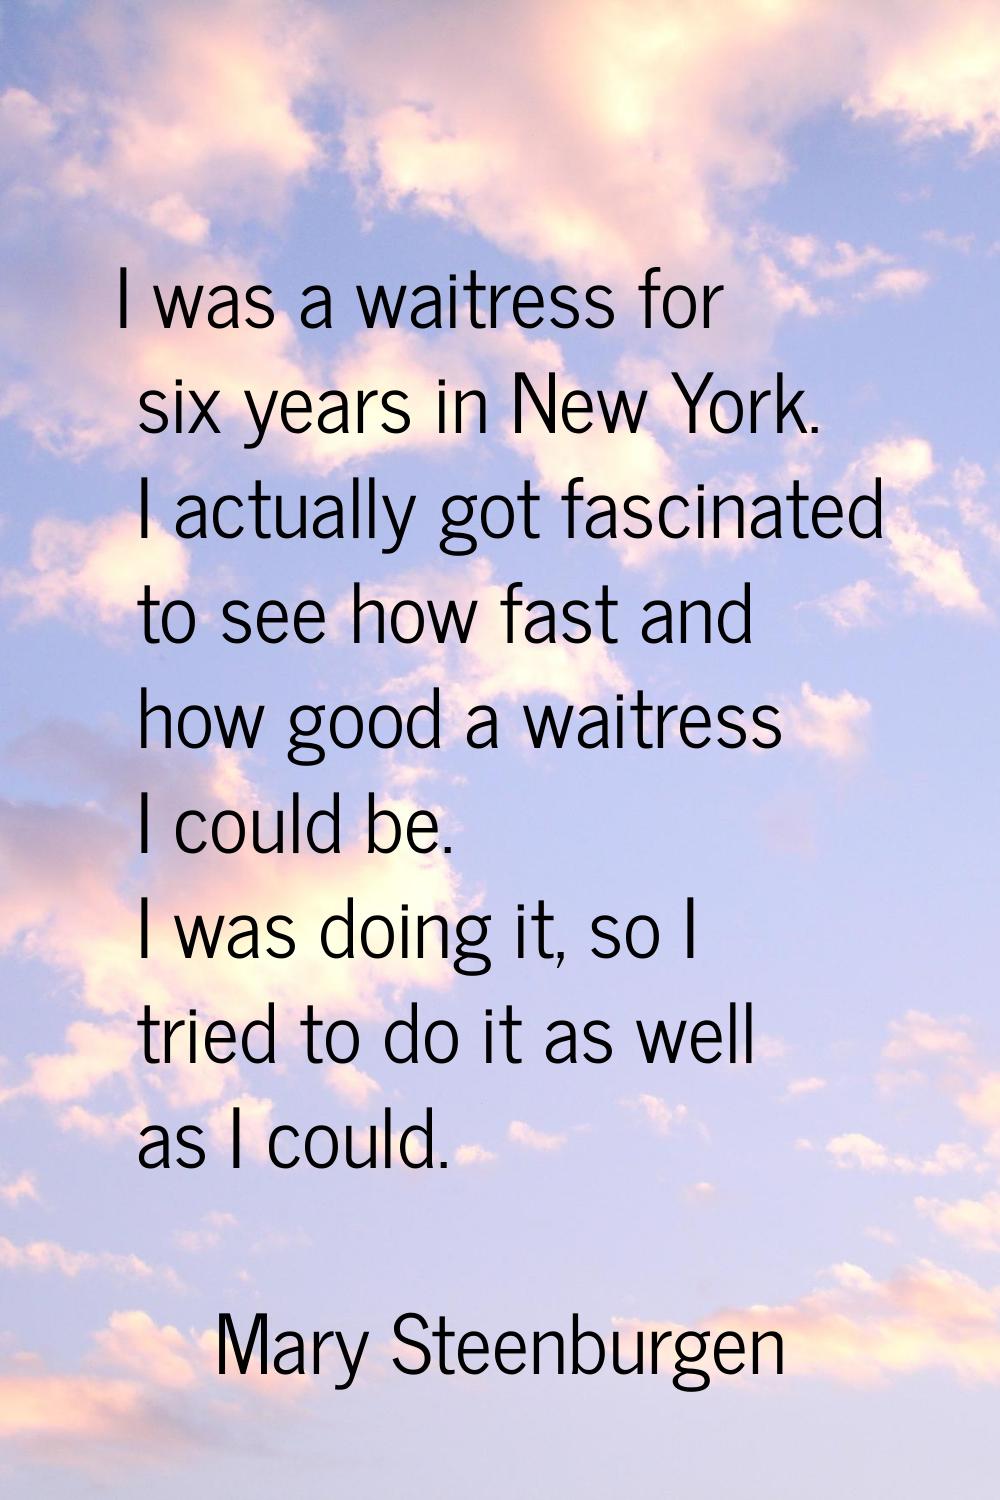 I was a waitress for six years in New York. I actually got fascinated to see how fast and how good 